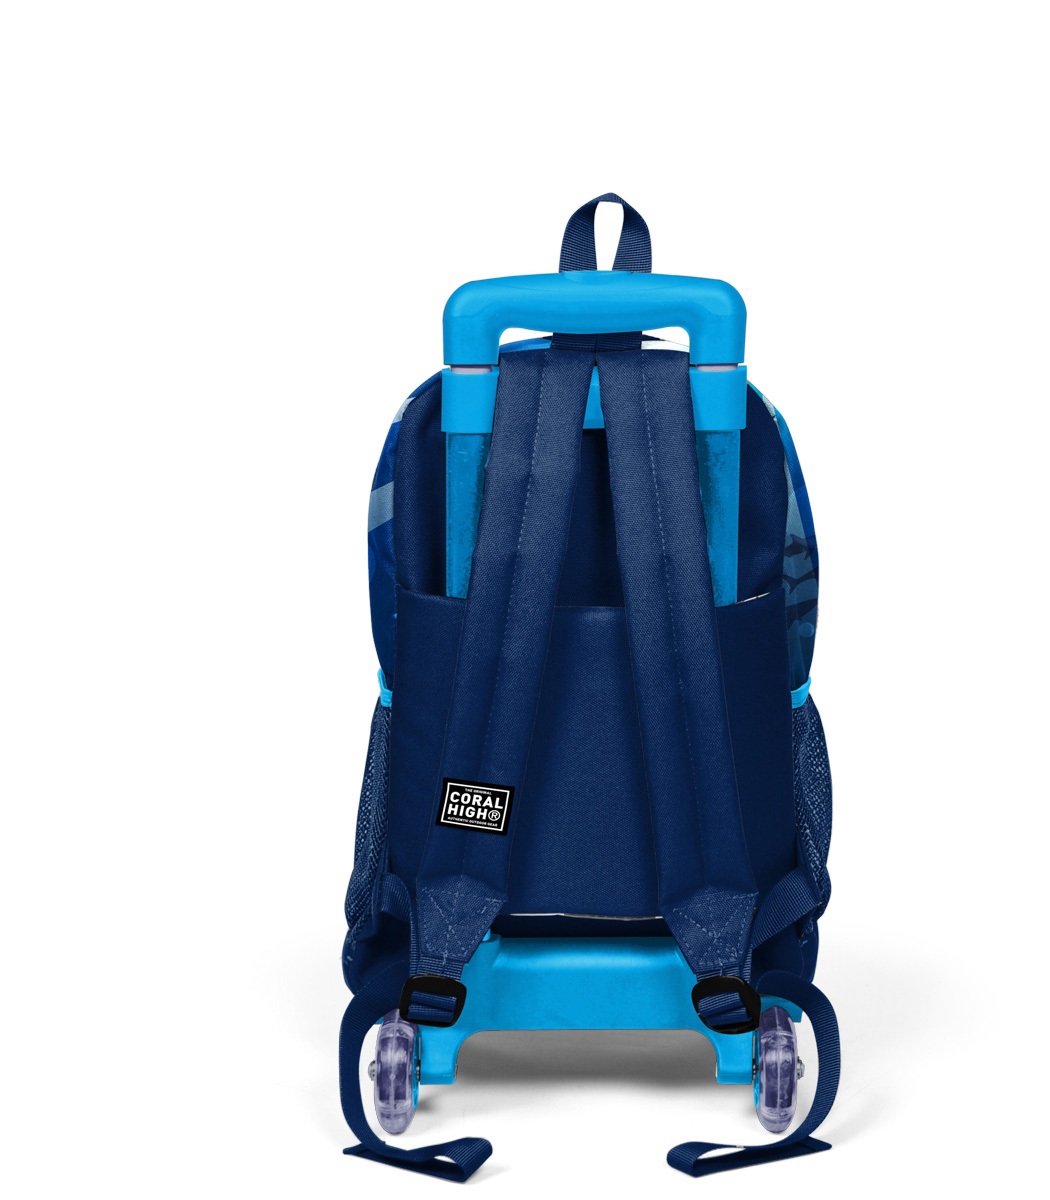 Coral High Kids Three Compartment Squeegee School Backpack - Navy Blue Shark Pattern